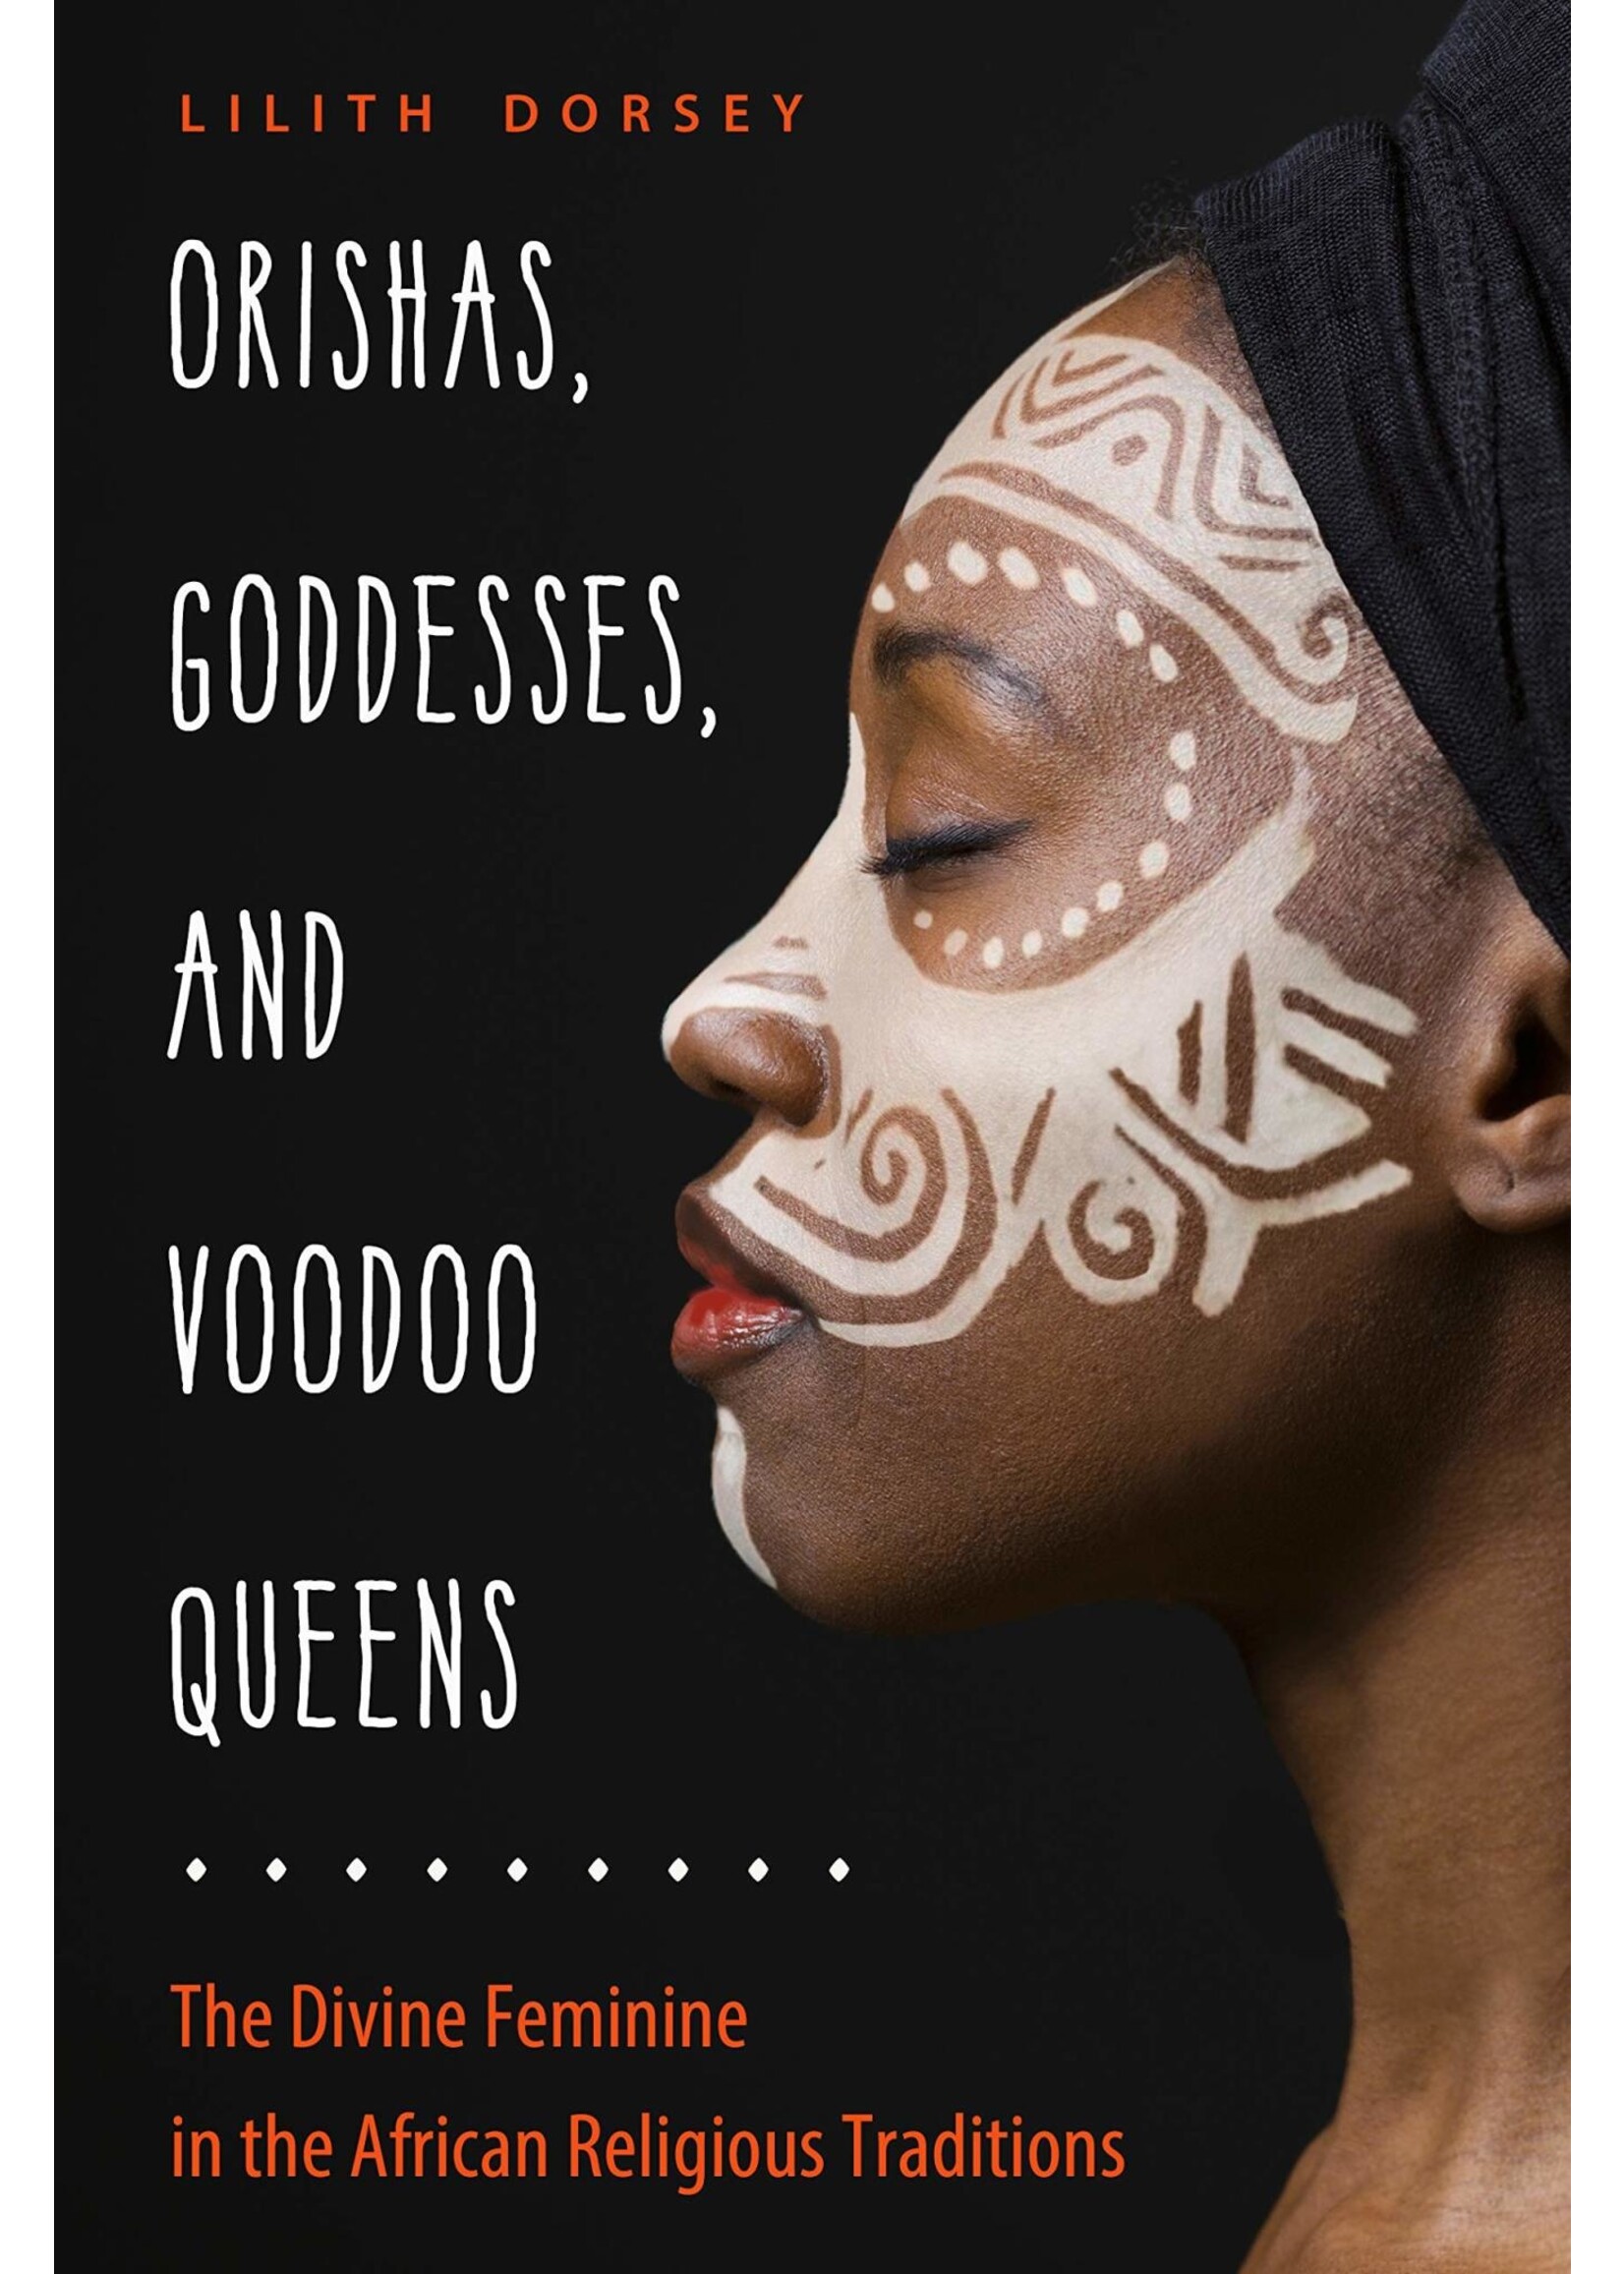 Orishas. Goddesses, and Voodoo Queens by Lilith Dorsey